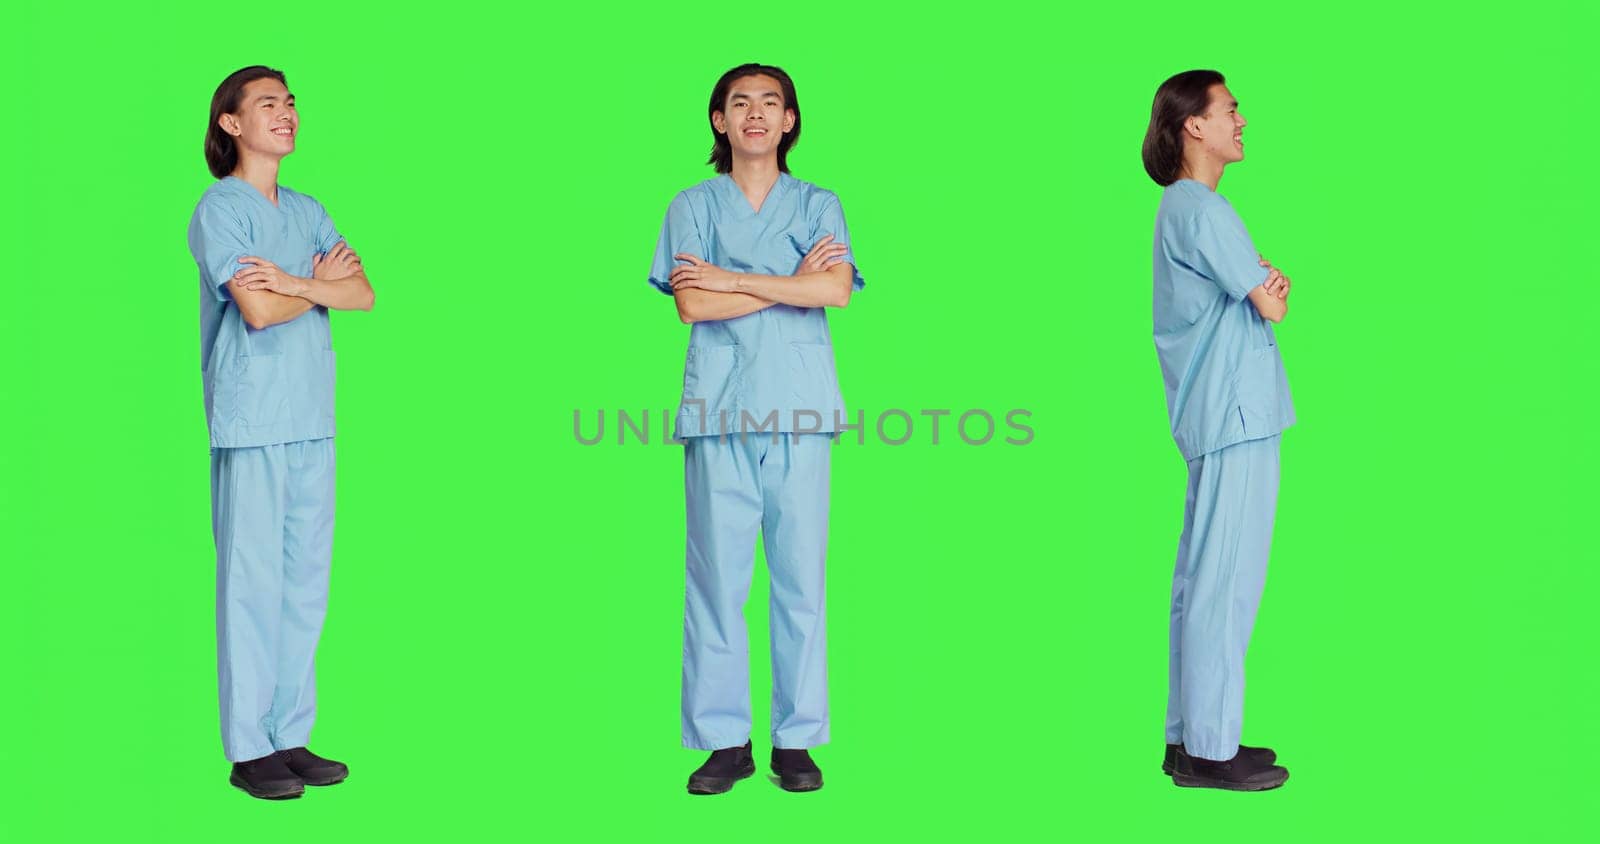 Joyful specialist standing in studio with confidence, wearing clinical clothing and posing with arms crossed over full body greenscreen. Medical assistant in healthcare industry, medicine career.